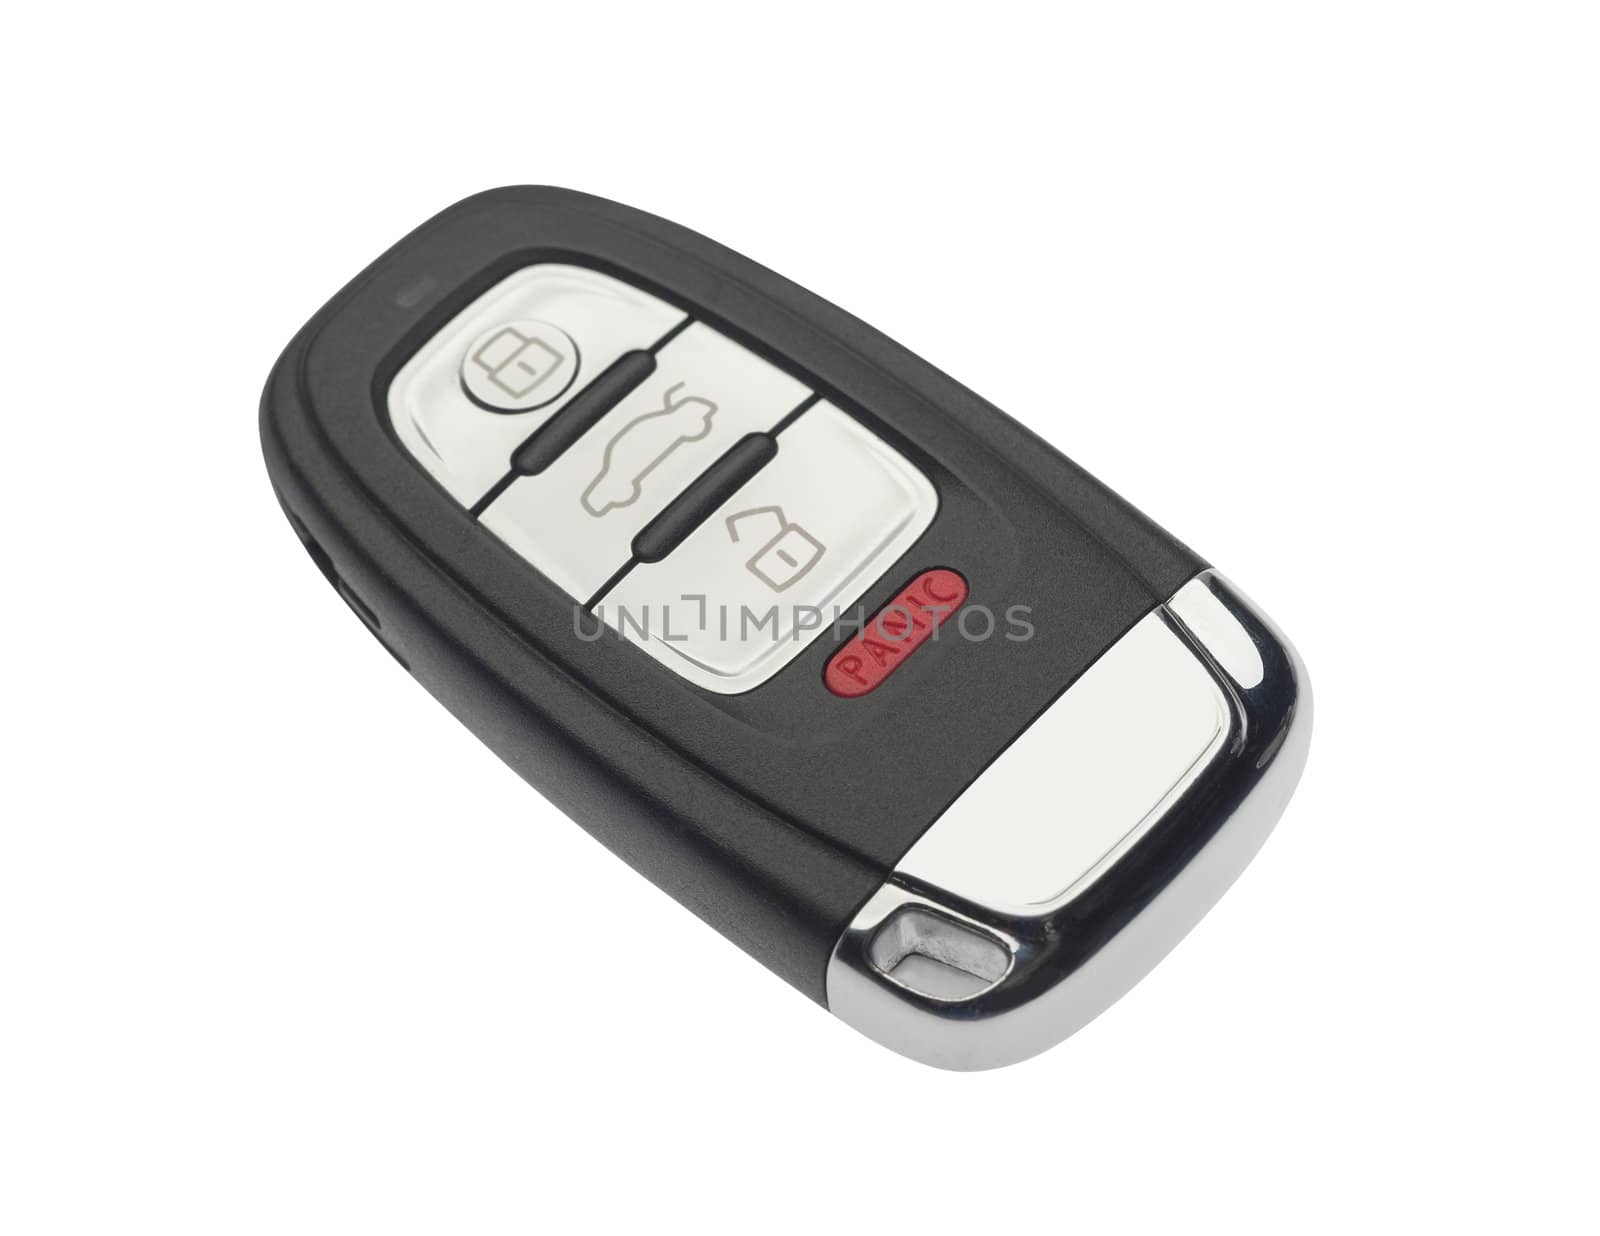 Car key solely electronic with no metal insert, isolated